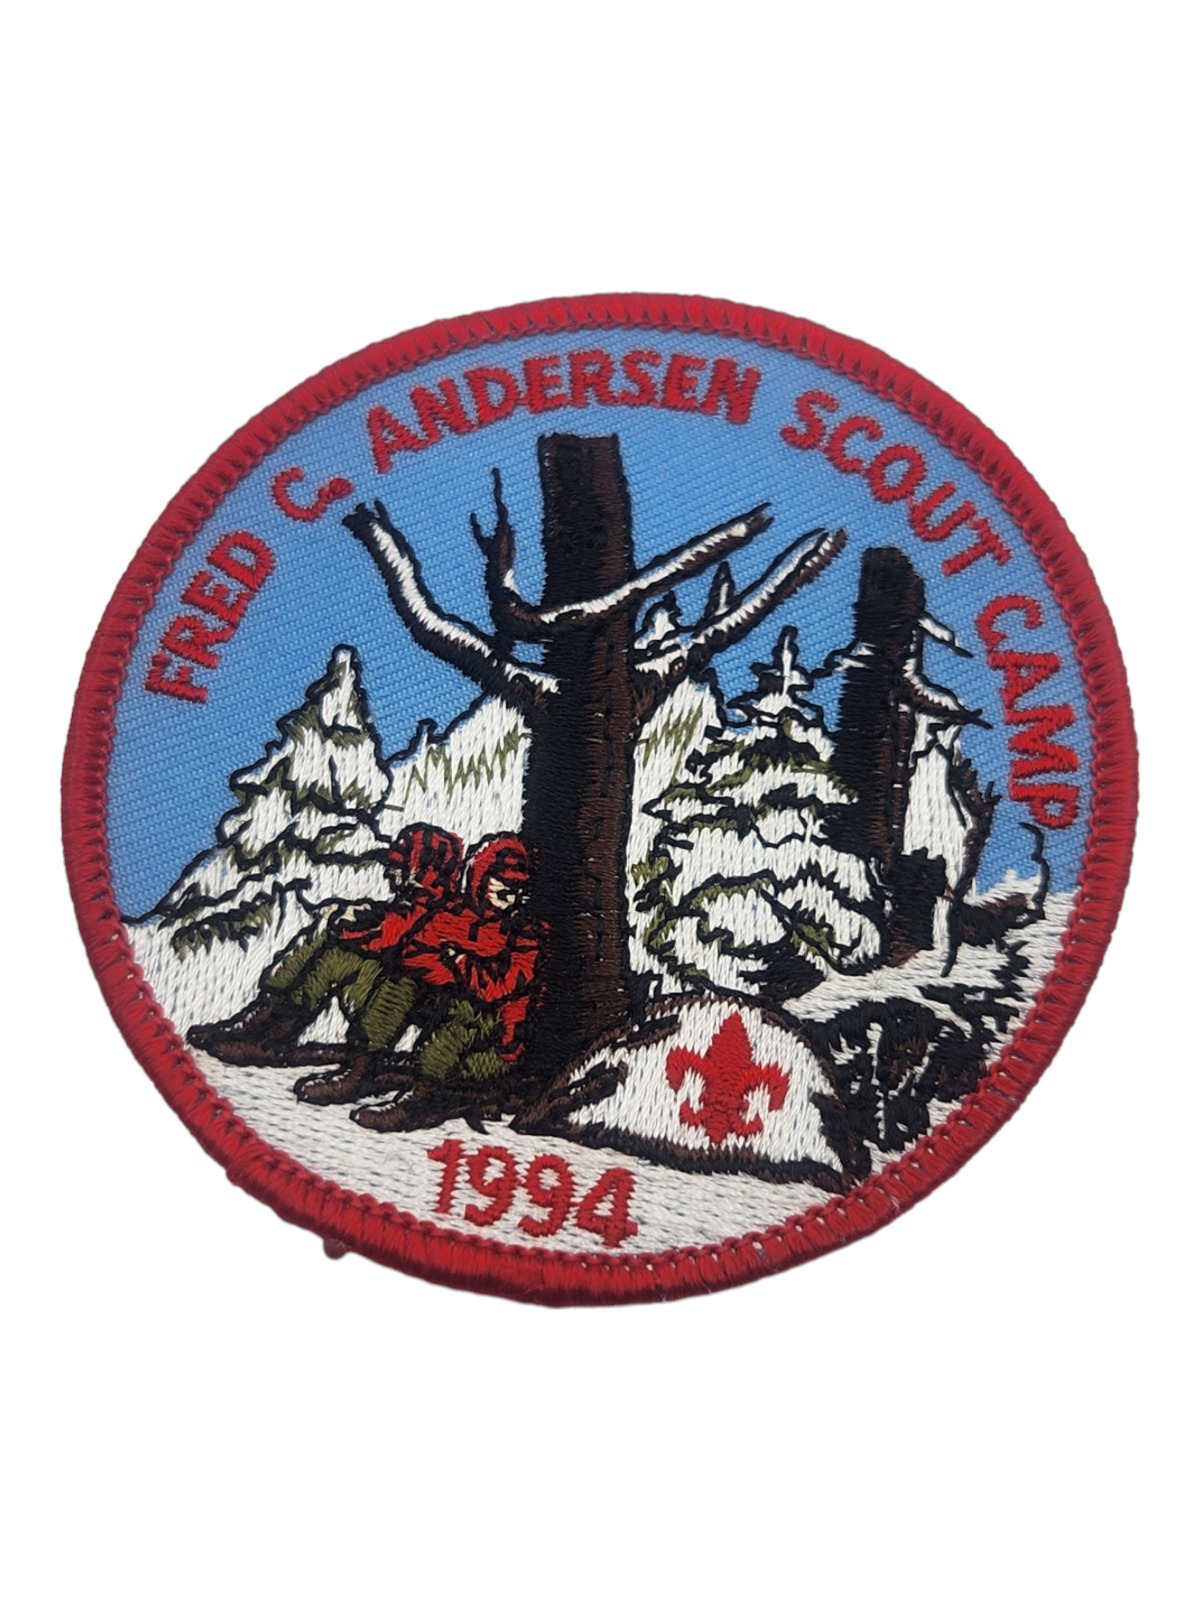 1994 Fred C. Andersen Scout Camp Boy Scout BSA Patch